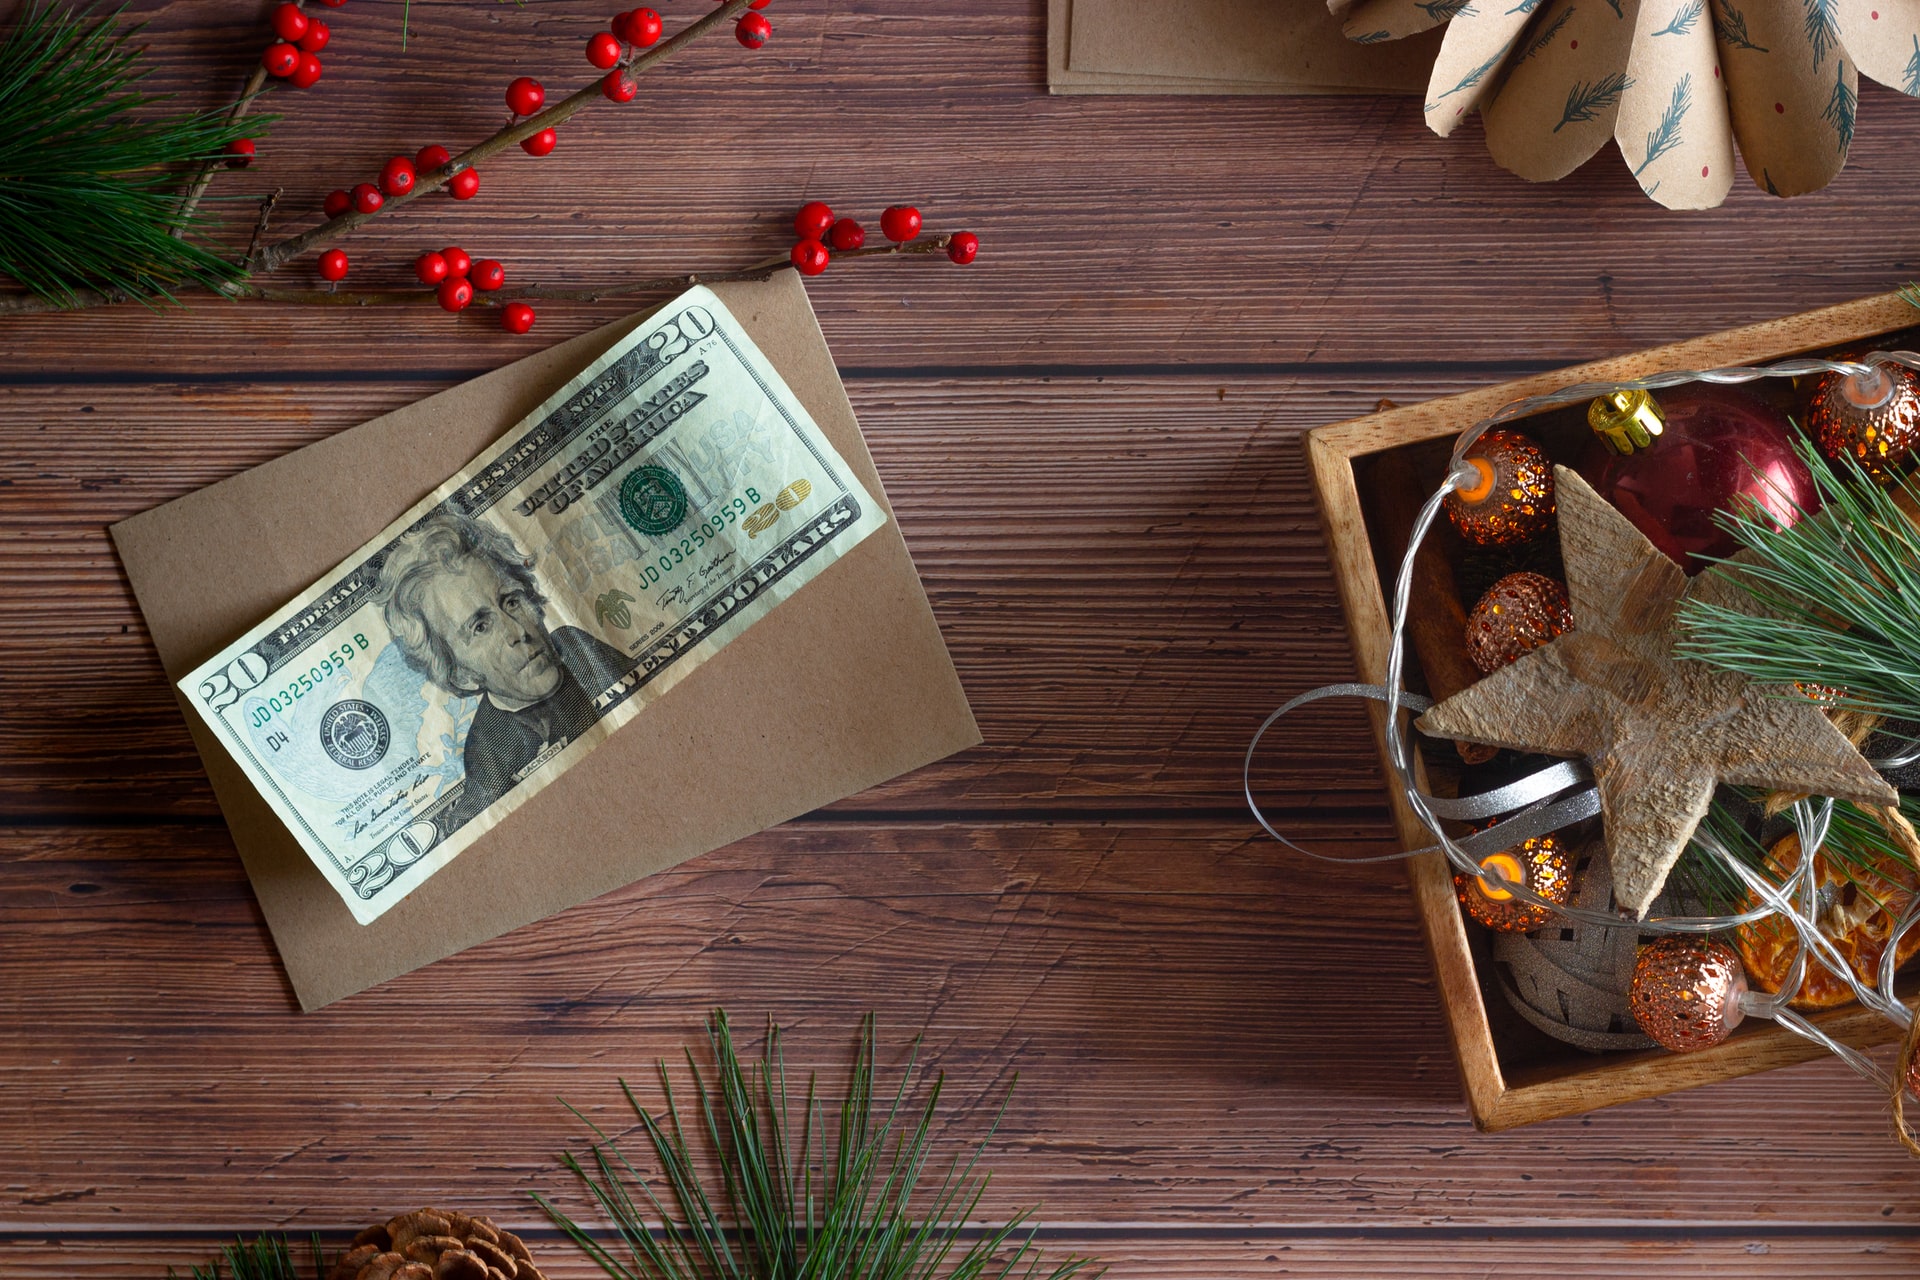 What Two Holidays Excluding Christmas Generate The Most Money In The U.S. Each Year?